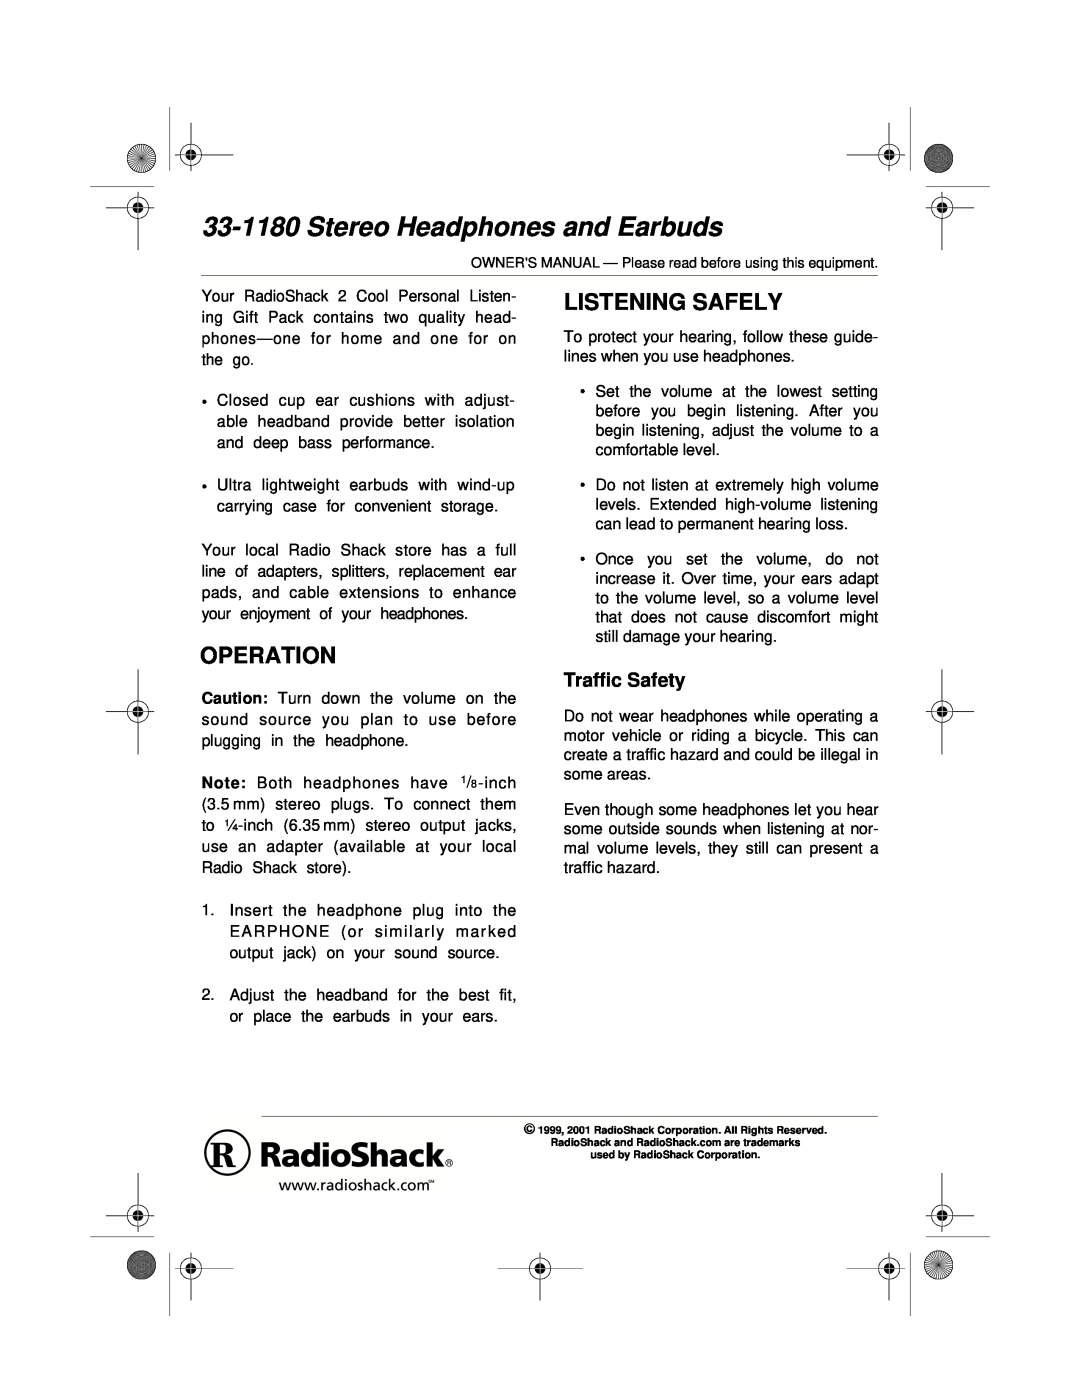 Radio Shack owner manual Operation, Listening Safely, 33-1180Stereo Headphones and Earbuds, Traffic Safety 